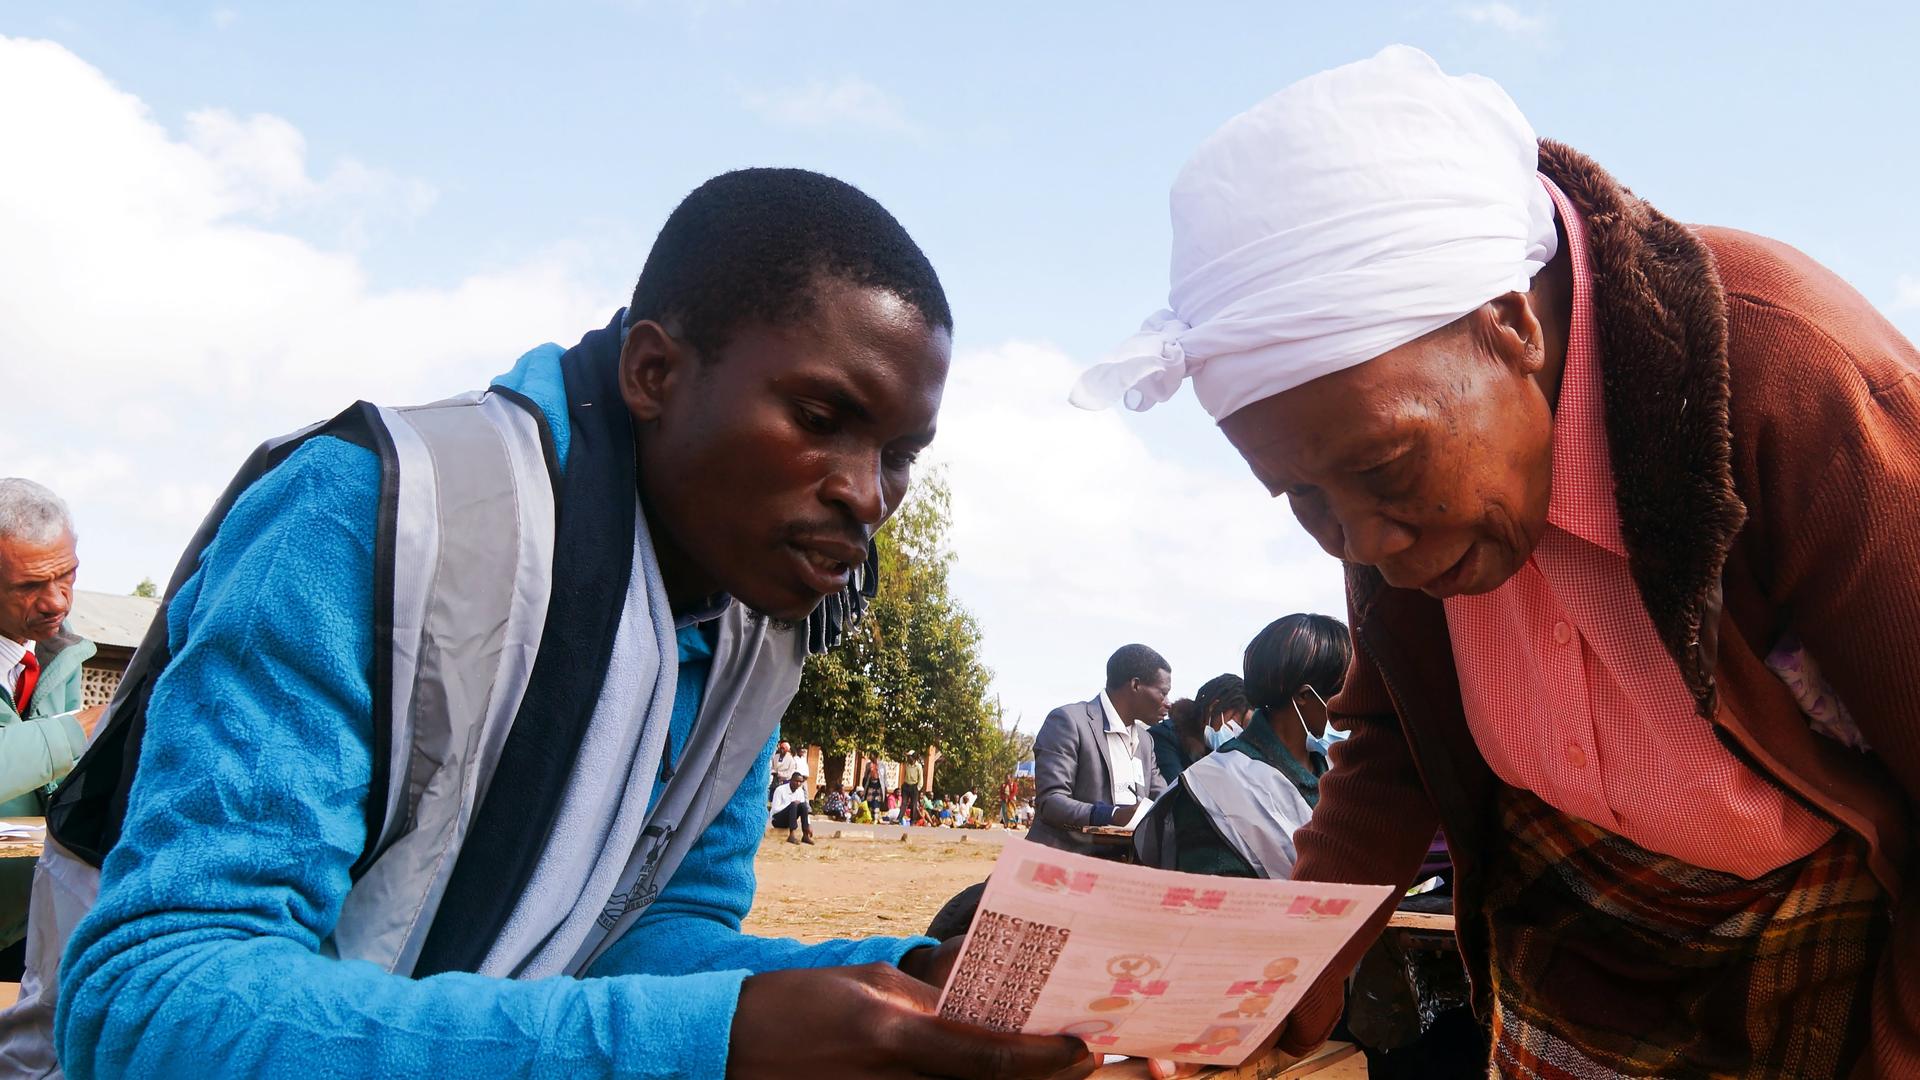 A man in Malawi wearing a blue shirt explains a document to an elderly woman wearing a white head wrap outside 